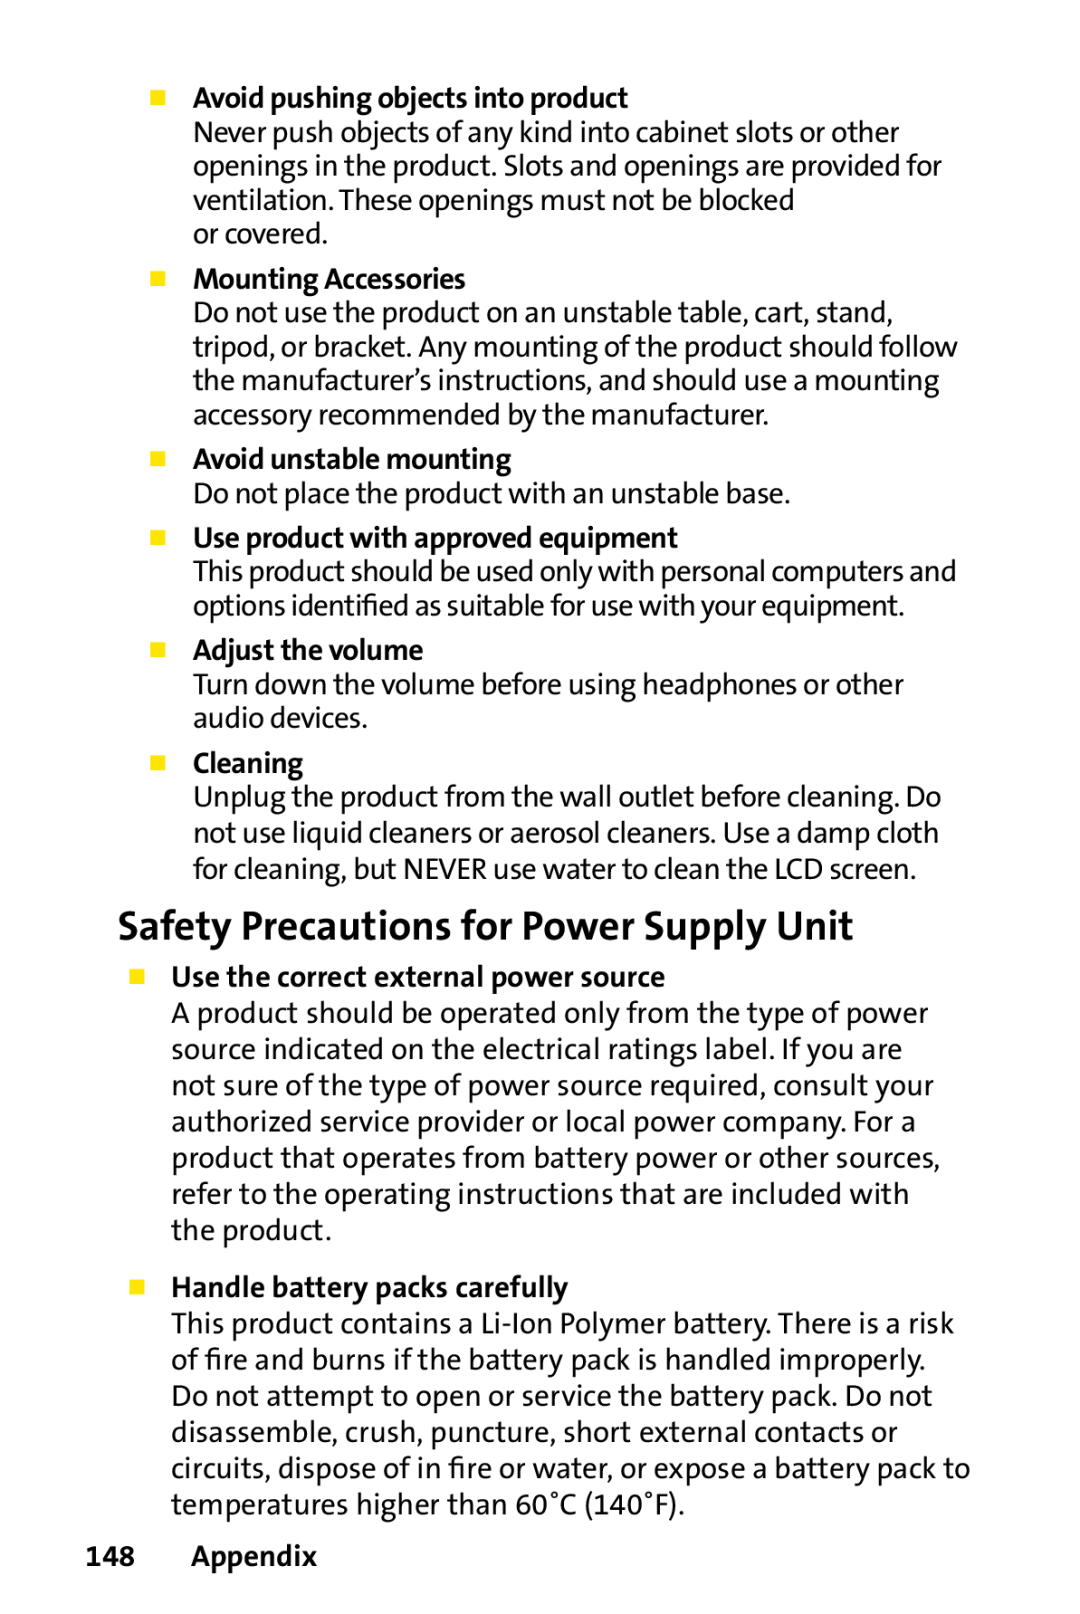 Sprint Nextel PPC-6700 Safety Precautions for Power Supply Unit,  Avoid pushing objects into product,  Adjust the volume 